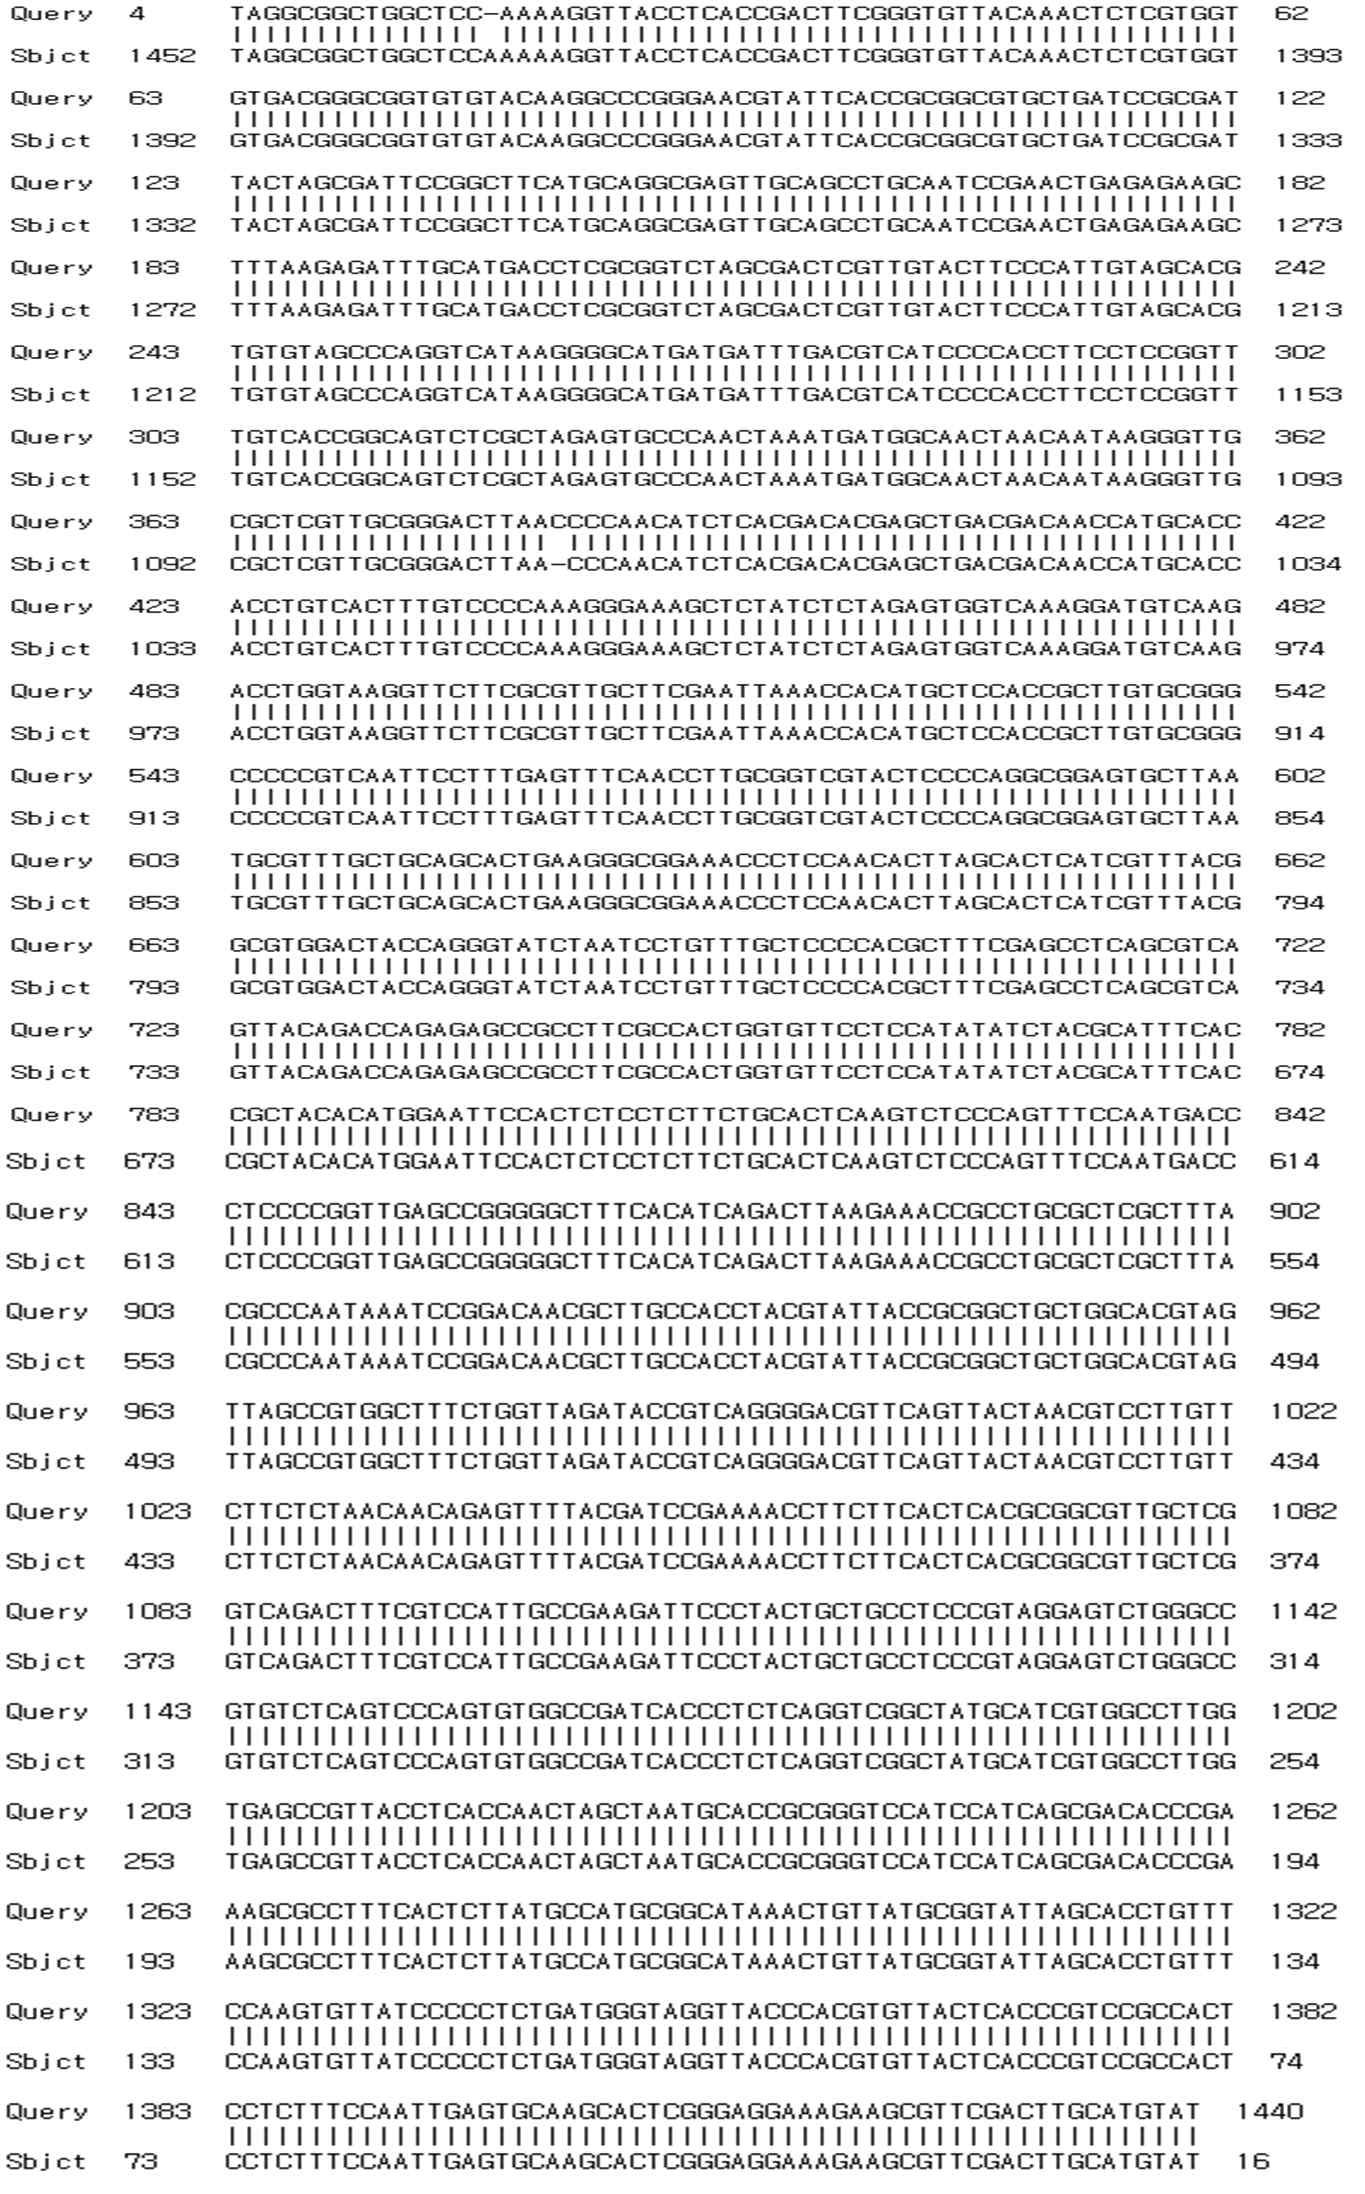 16S rRNA sequencing of D-366 strain